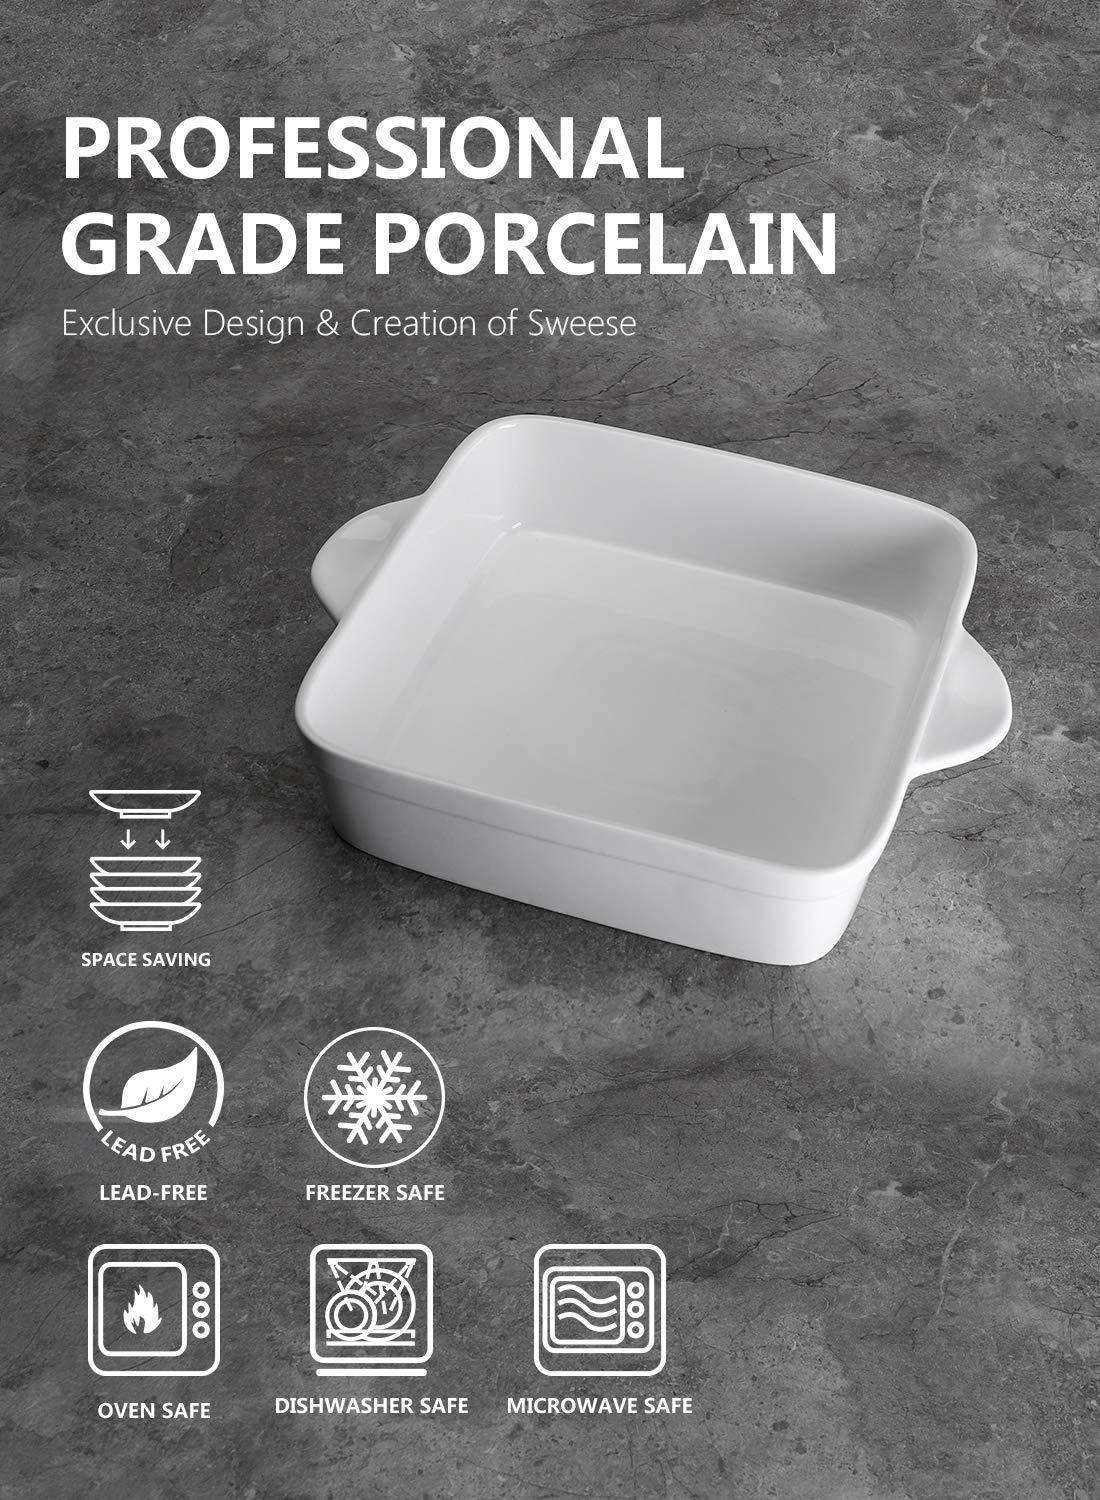 Sweese 8x8 inch Square Porcelain Baking Dish with Double Handles - Non-Stick Oven Casserole Pan for Brownie, Lasagna, Roasting - Great for Serving or Cooking - CookCave